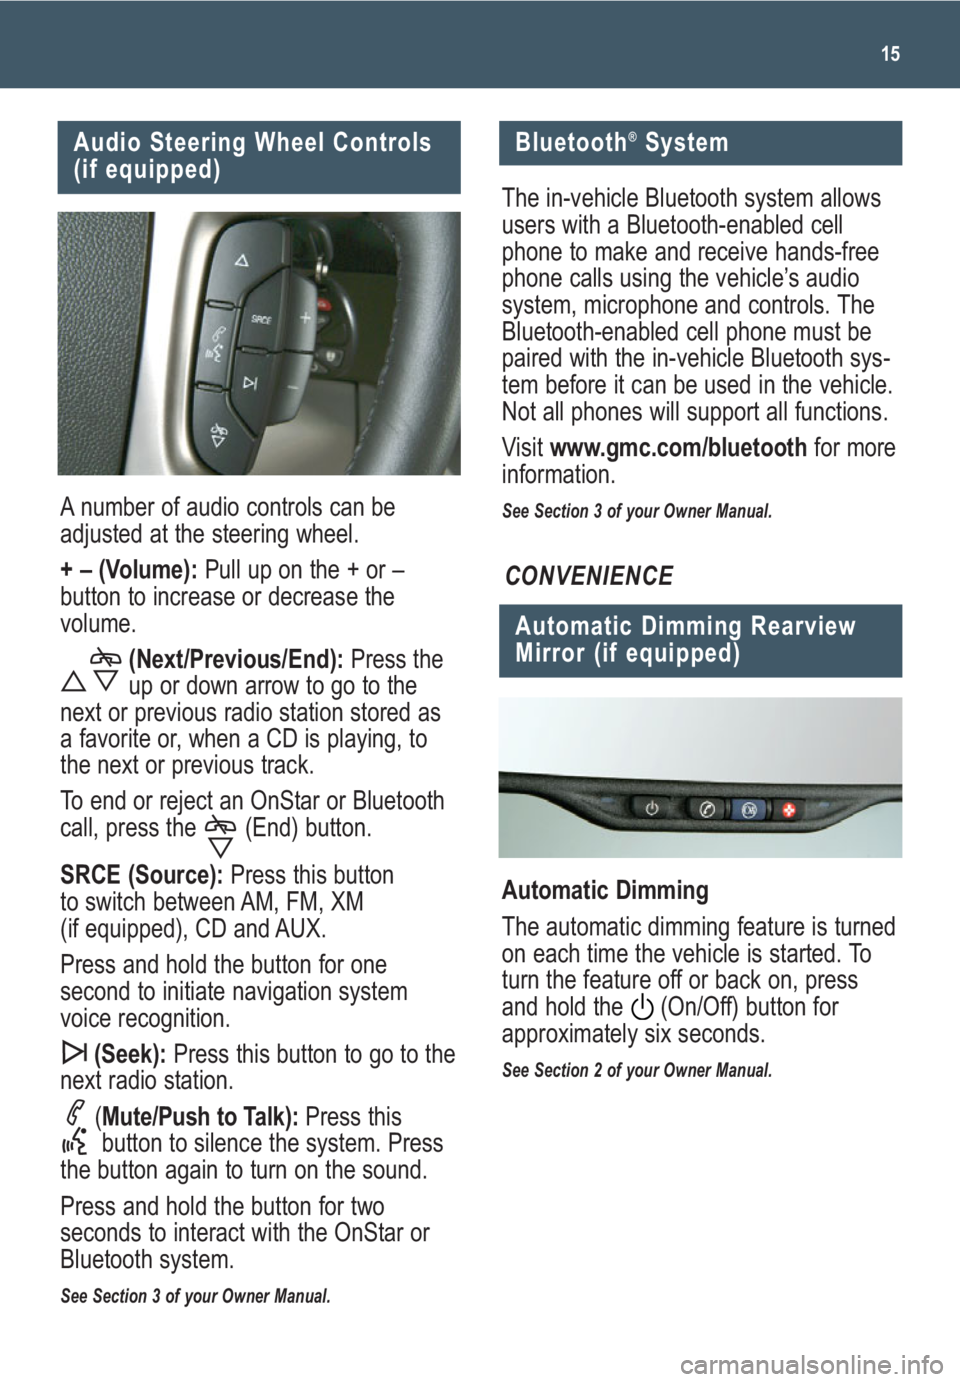 GMC YUKON 2009  Get To Know Guide 
15
A number of audio controls can be
adjusted at the steering wheel. 
+ – (Volume):Pull up on the + or –
button to increase or decrease the
volume.
(Next/Previous/End): Press the
up or down arrow